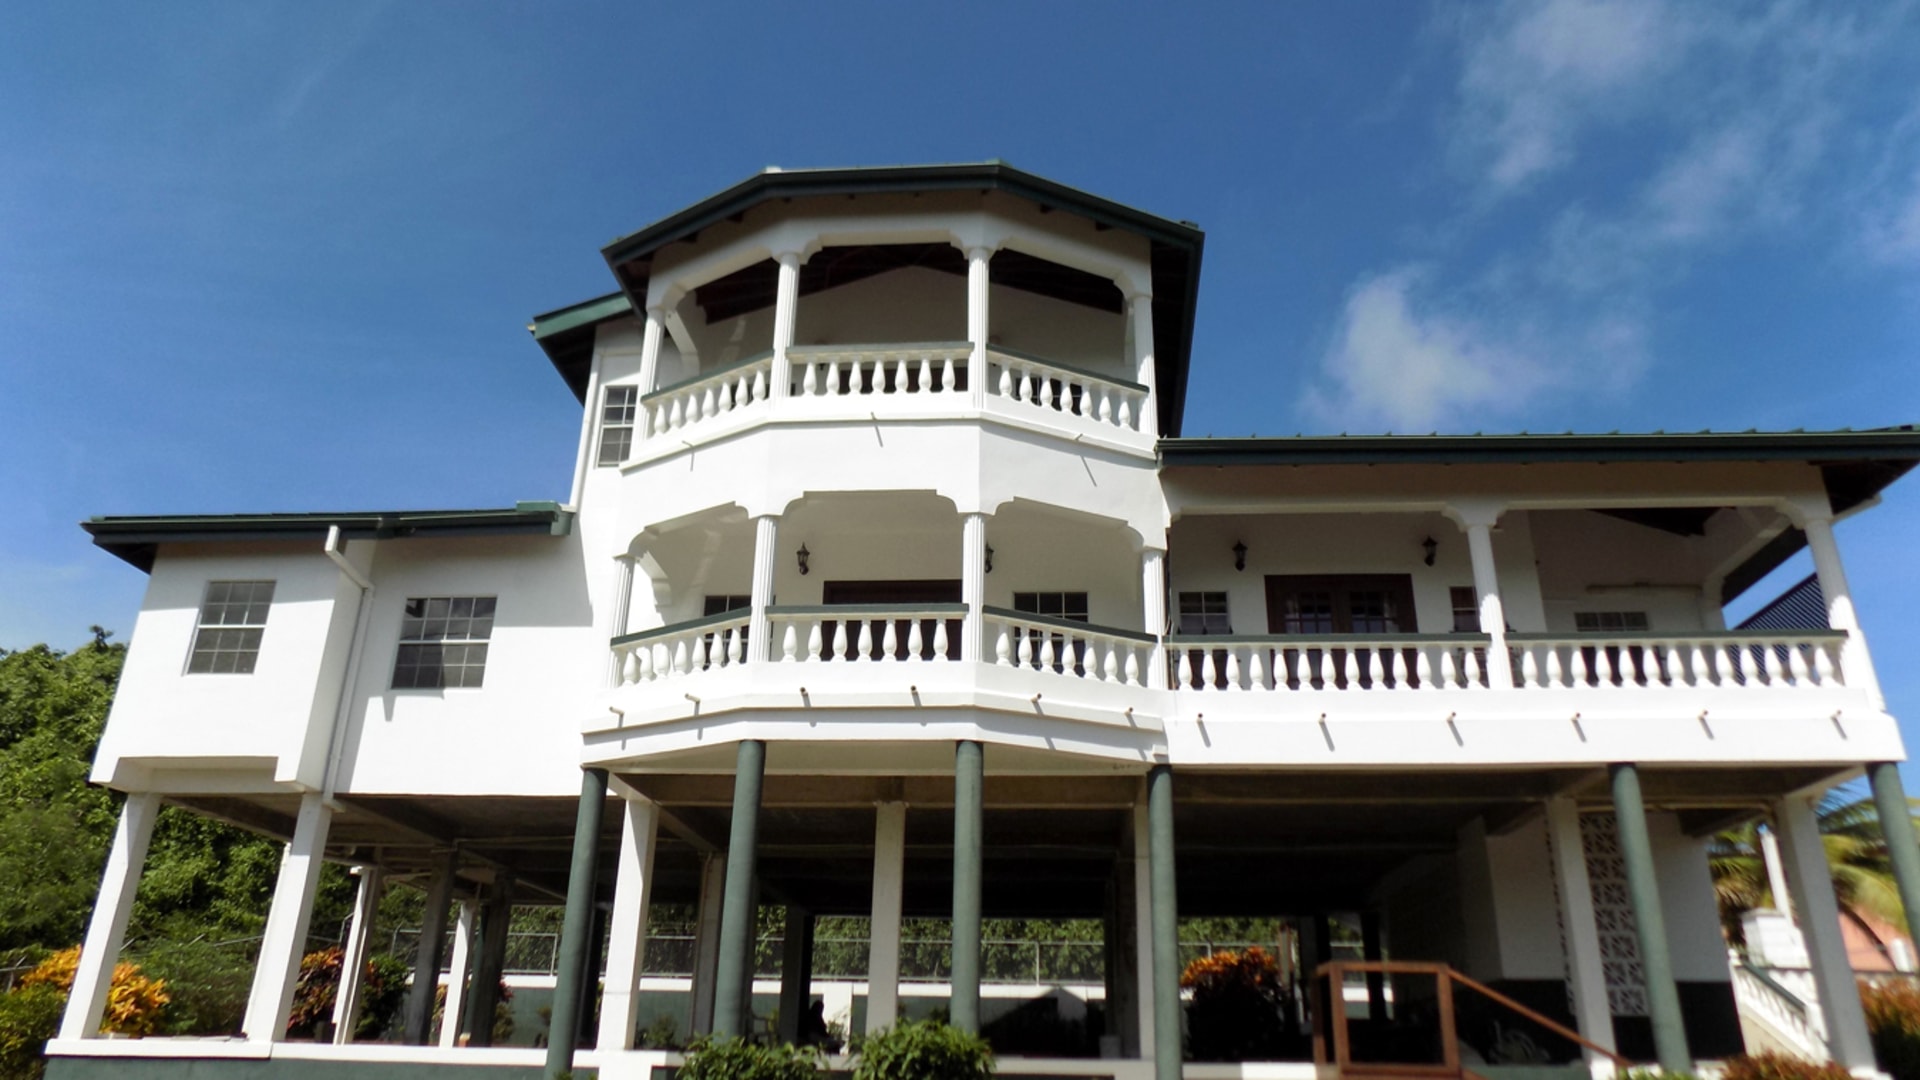 Properties For Sale in St Lucia, Caribbean